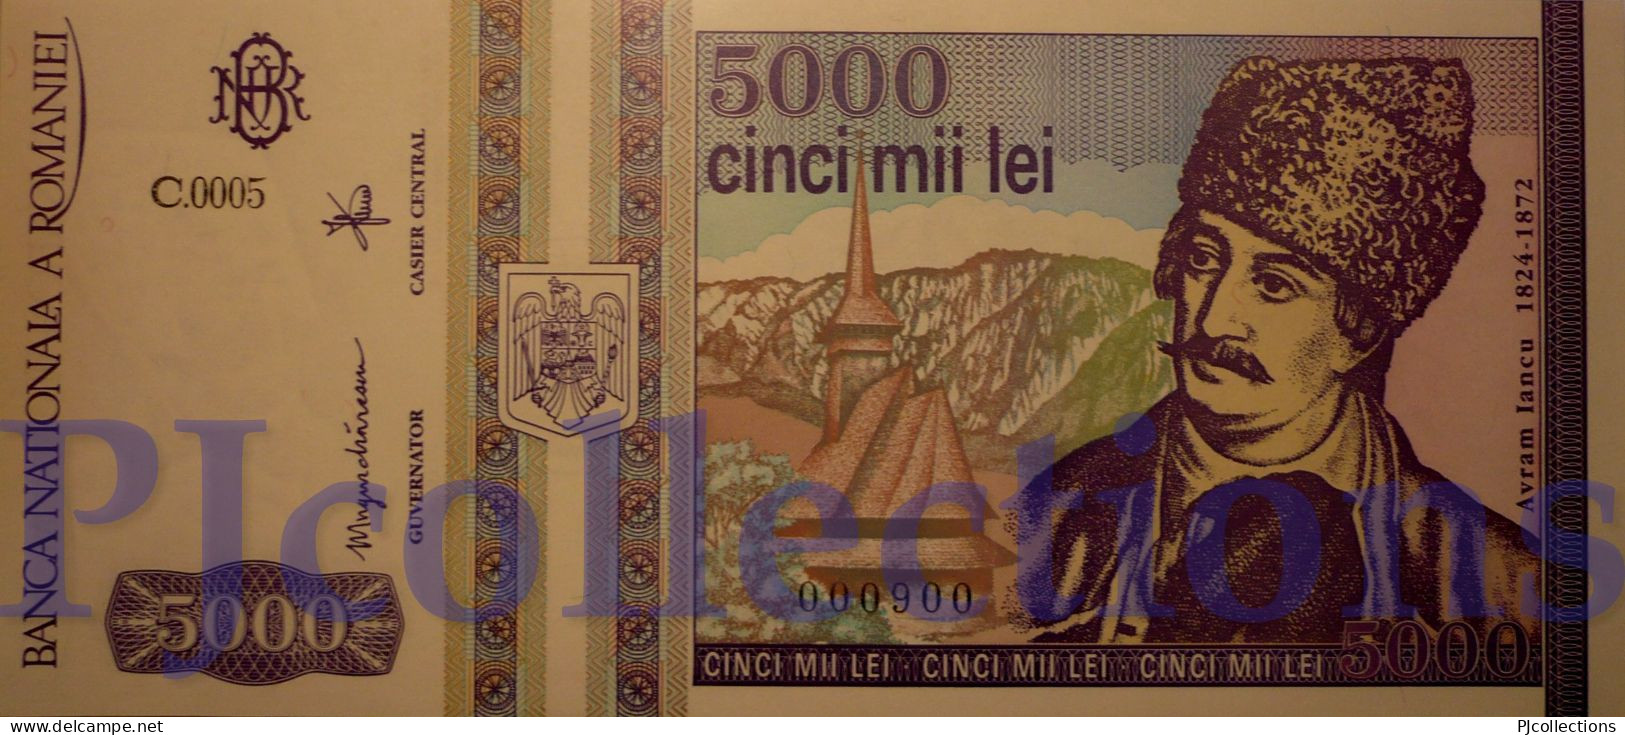 ROMANIA 5000 LEI 1993 PICK 104a UNC LOW & GOOD SERIAL NUMBER "000900" - Romania